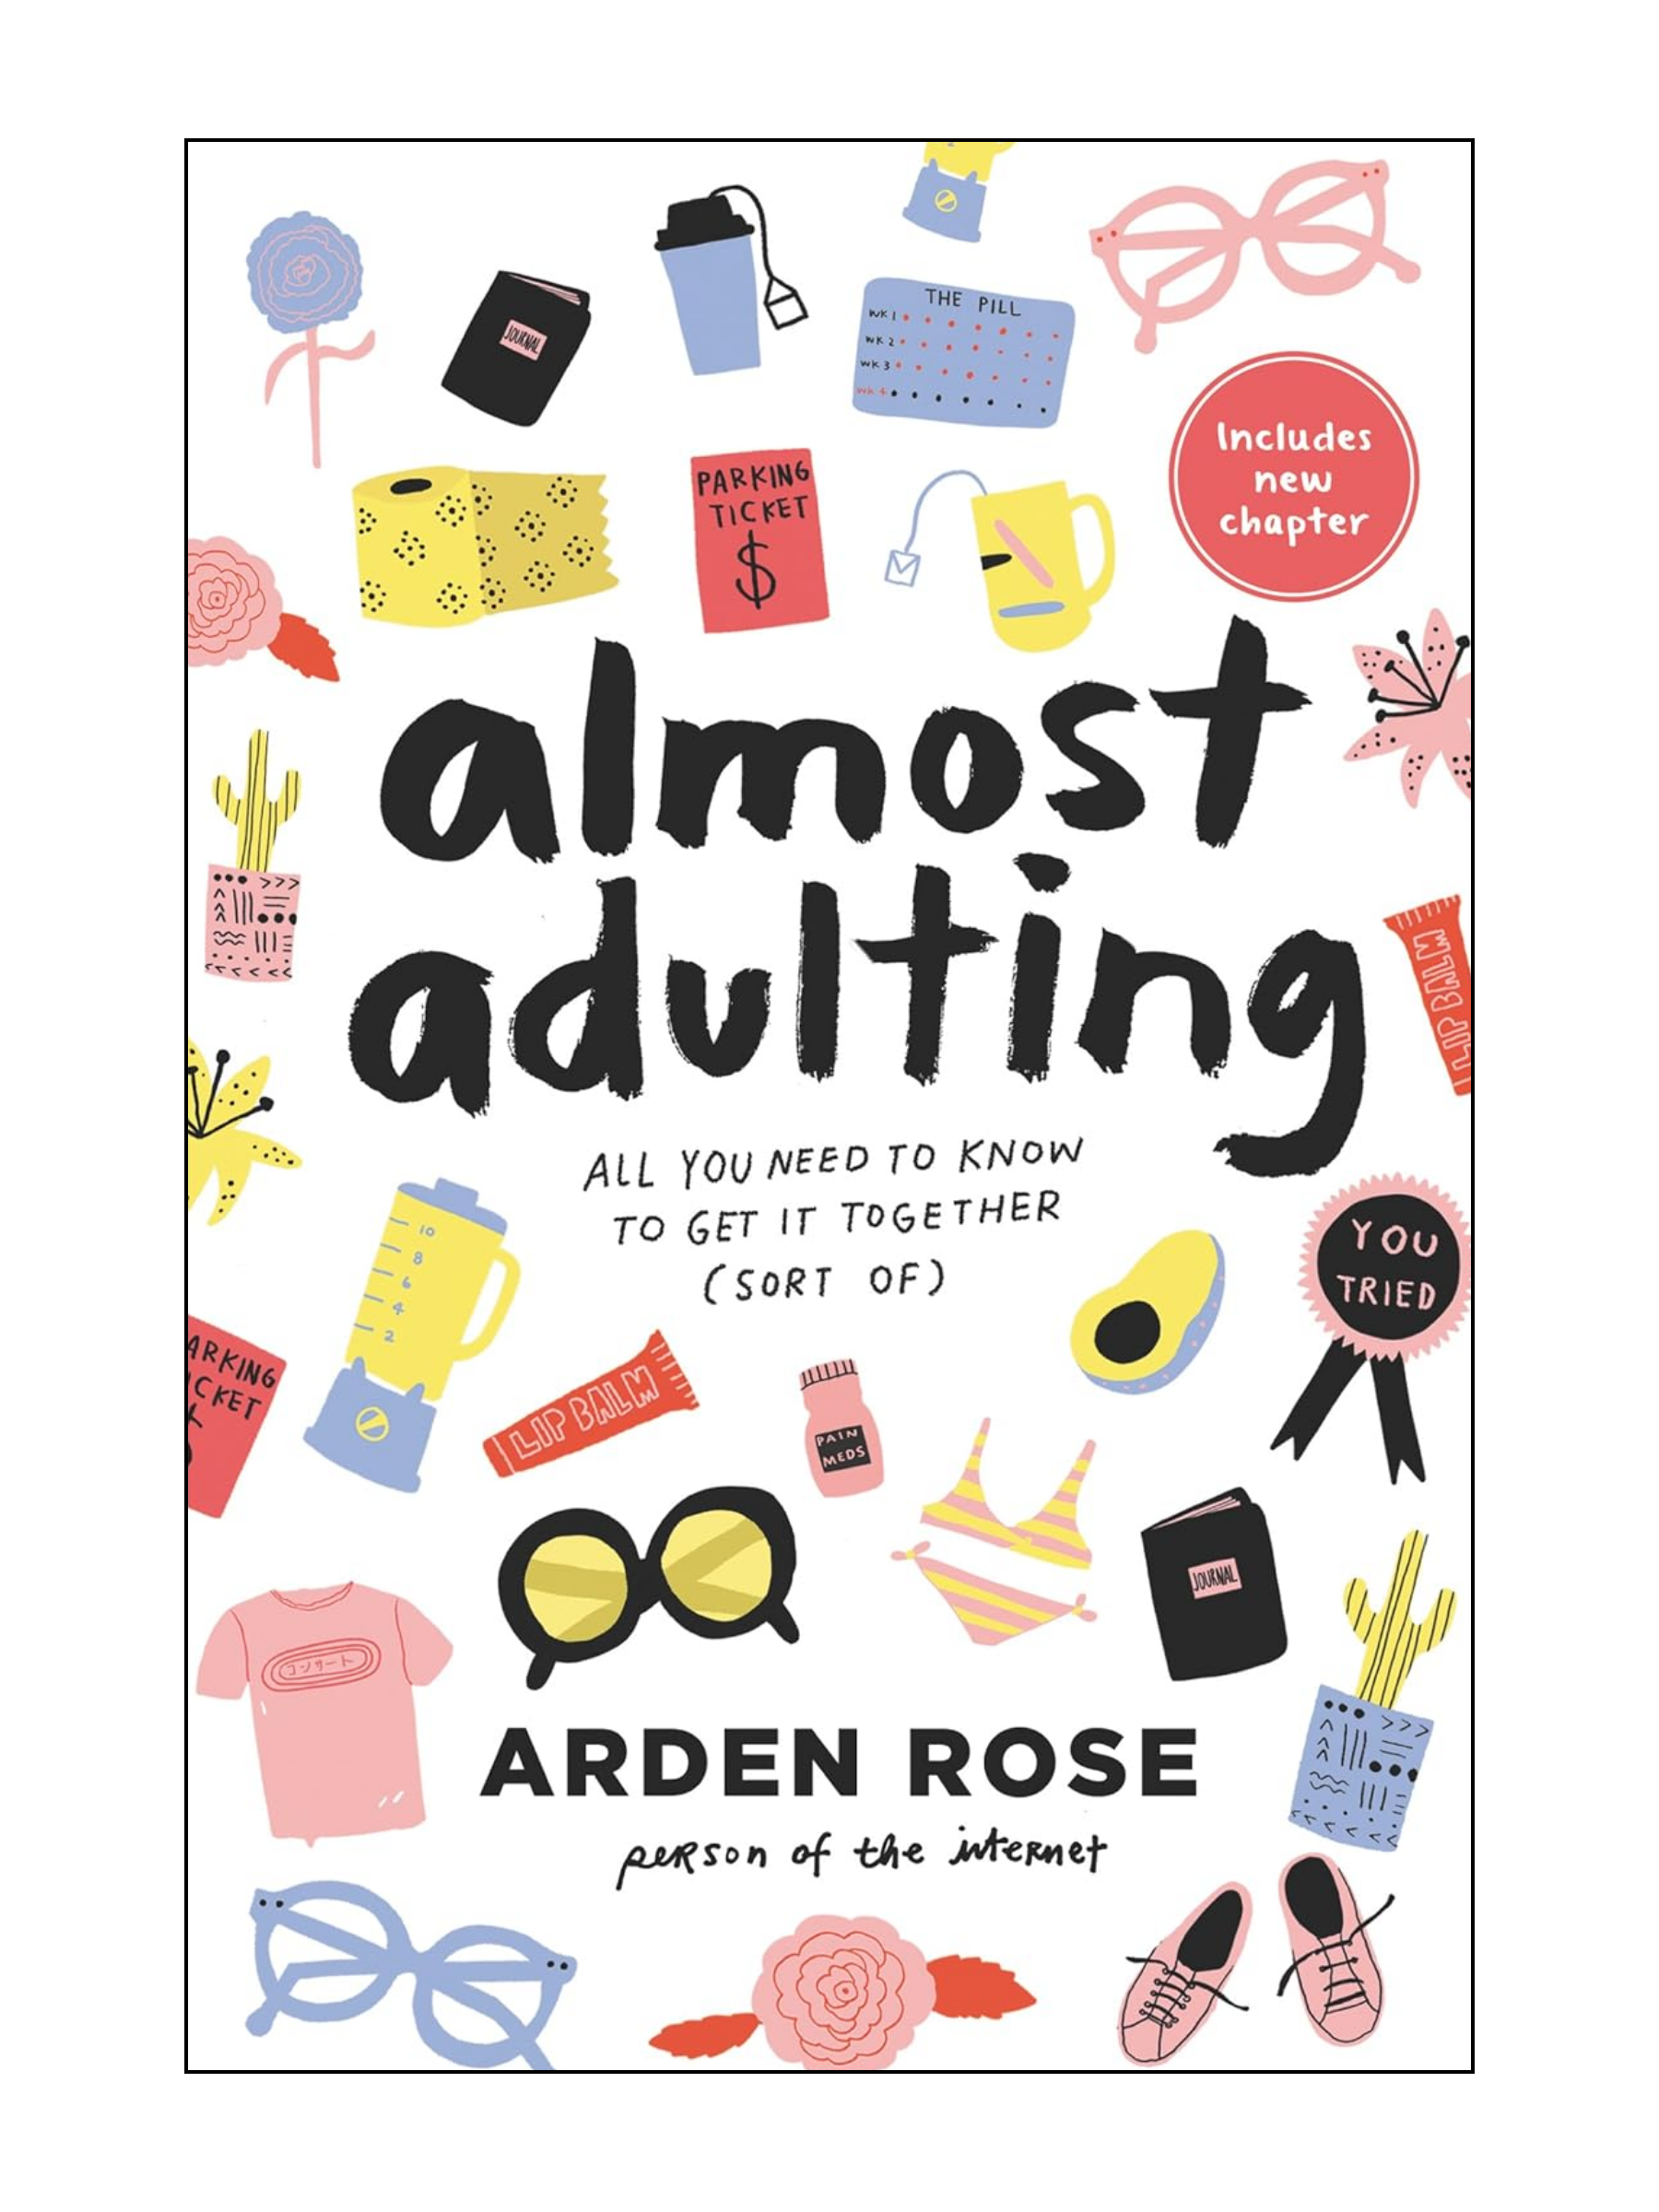 Nothing will compare to the advice you give your 18-year-old, but this funny guide can help equip them with a bit of real-world smarts. The book includes tips on how to put together an outfit on a budget, how to manifest a healthy relationship, and more. $8, Amazon. <a href="https://www.amazon.com/dp/0062574116?">Get it now!</a><p>Sign up for today’s biggest stories, from pop culture to politics.</p><a href="https://www.glamour.com/newsletter/news?sourceCode=msnsend">Sign Up</a>